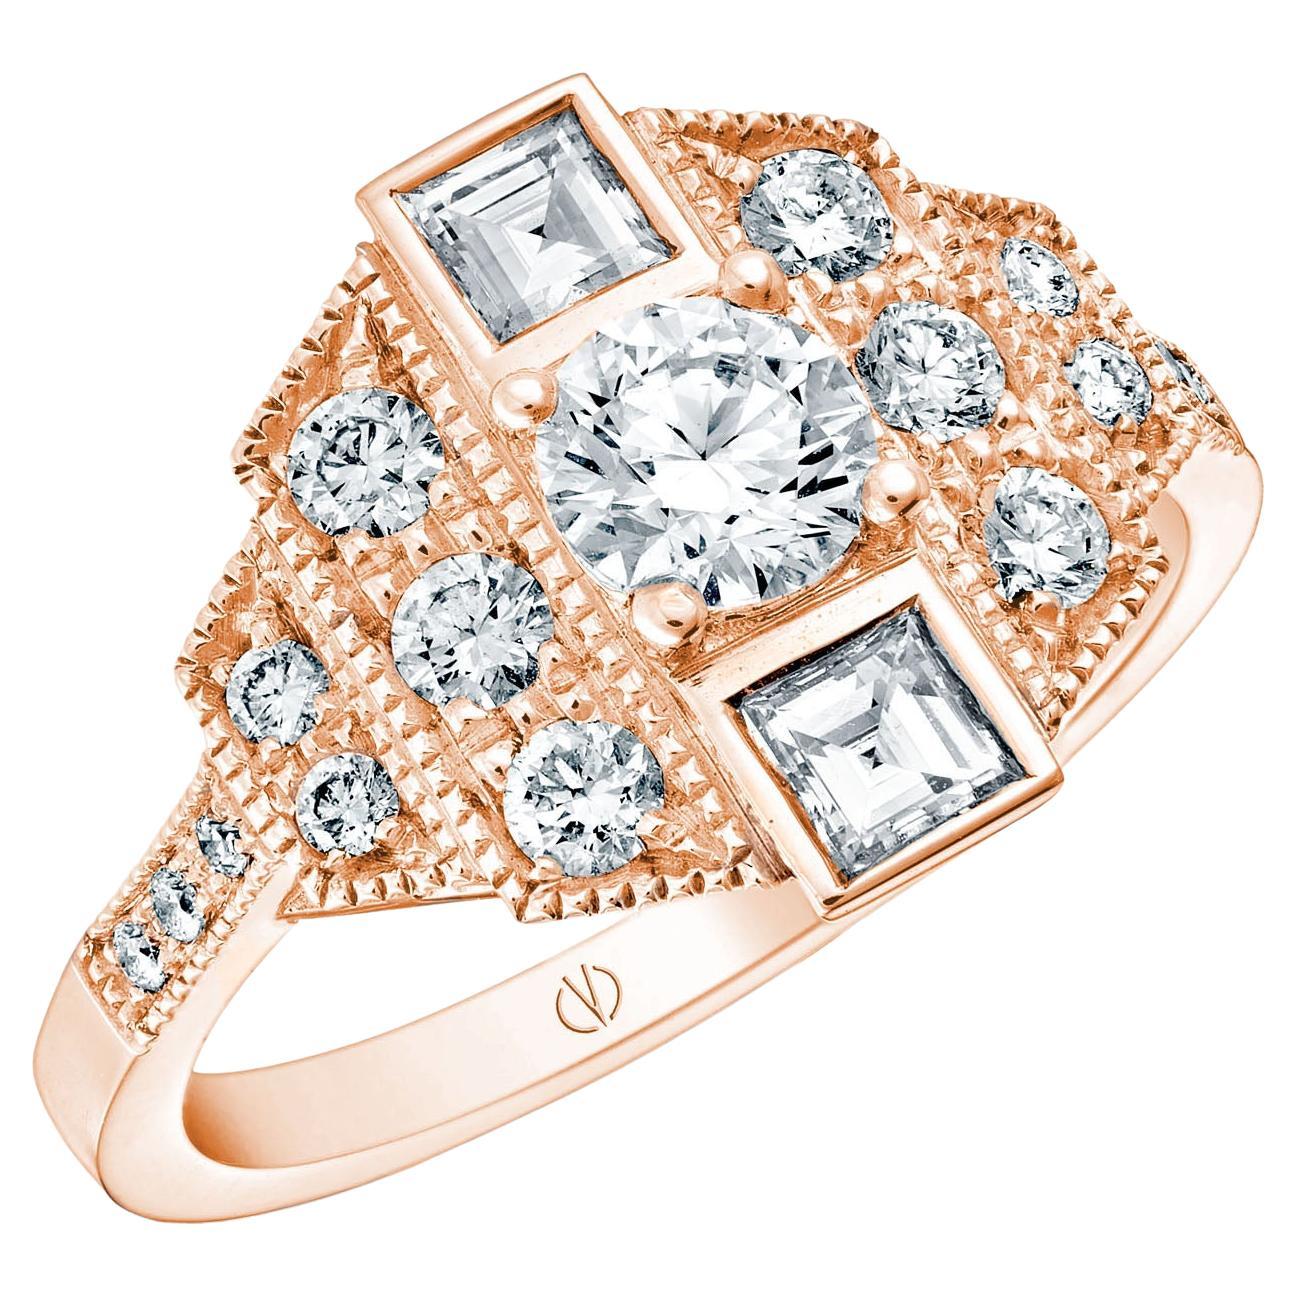 For Sale:  Art Deco Style 18k Rose Gold 0.50 Ct Diamond Ring Set With 2 Square Diamonds